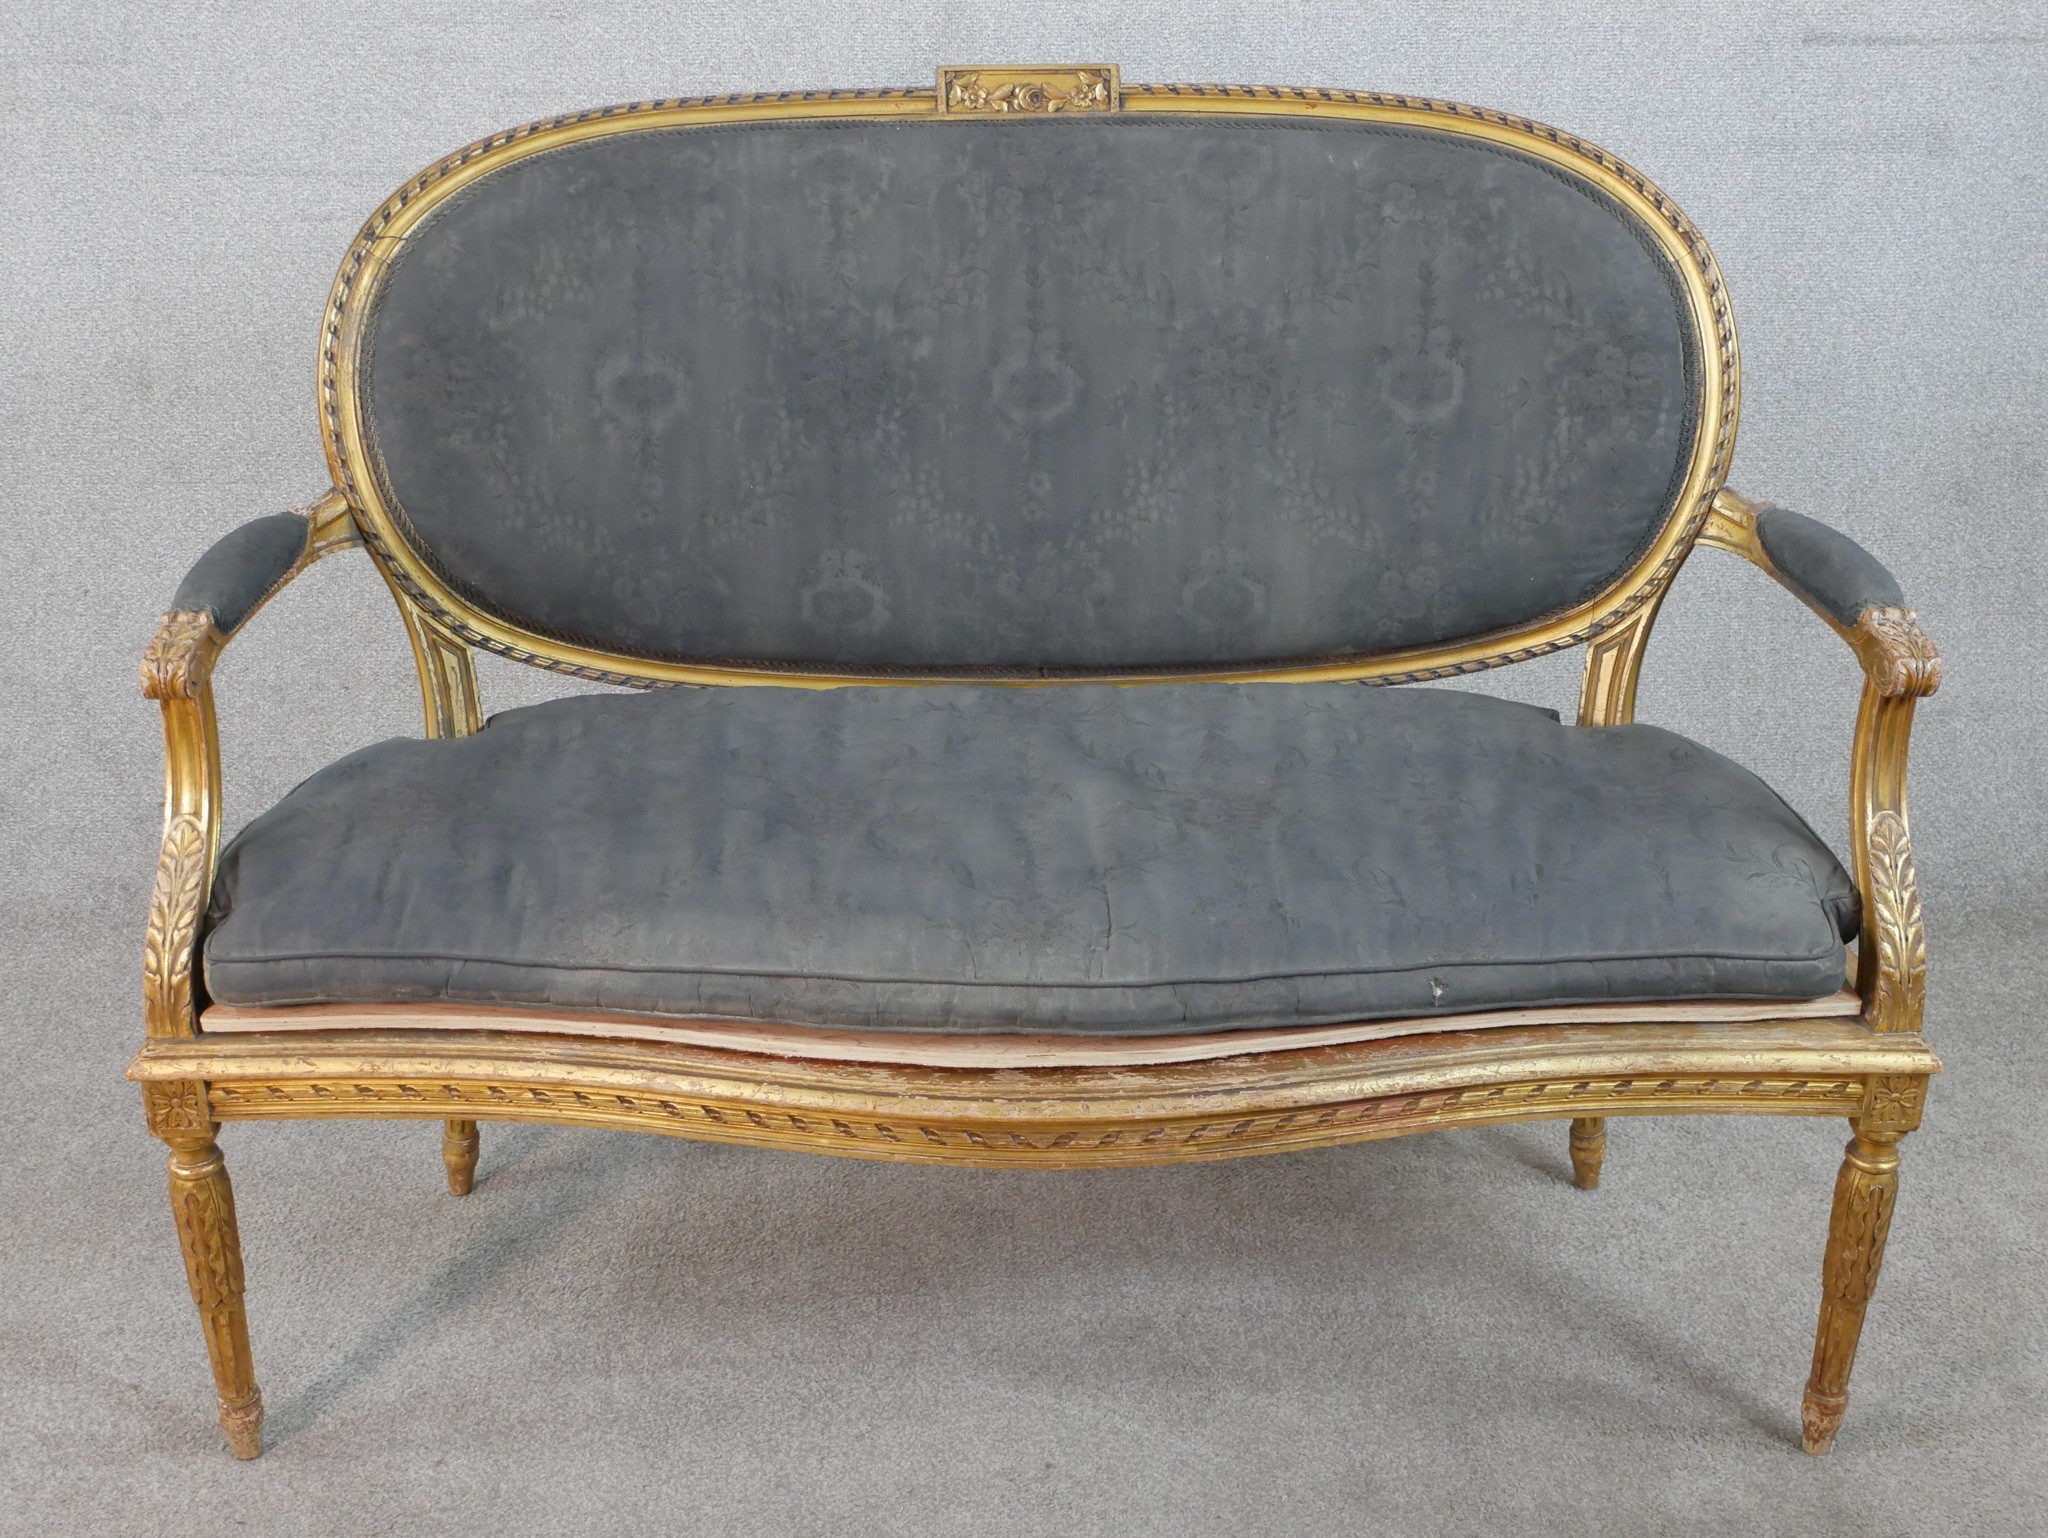 A French Louis XVI style carved giltwood canape, upholstered in grey fabric to the oval back, the